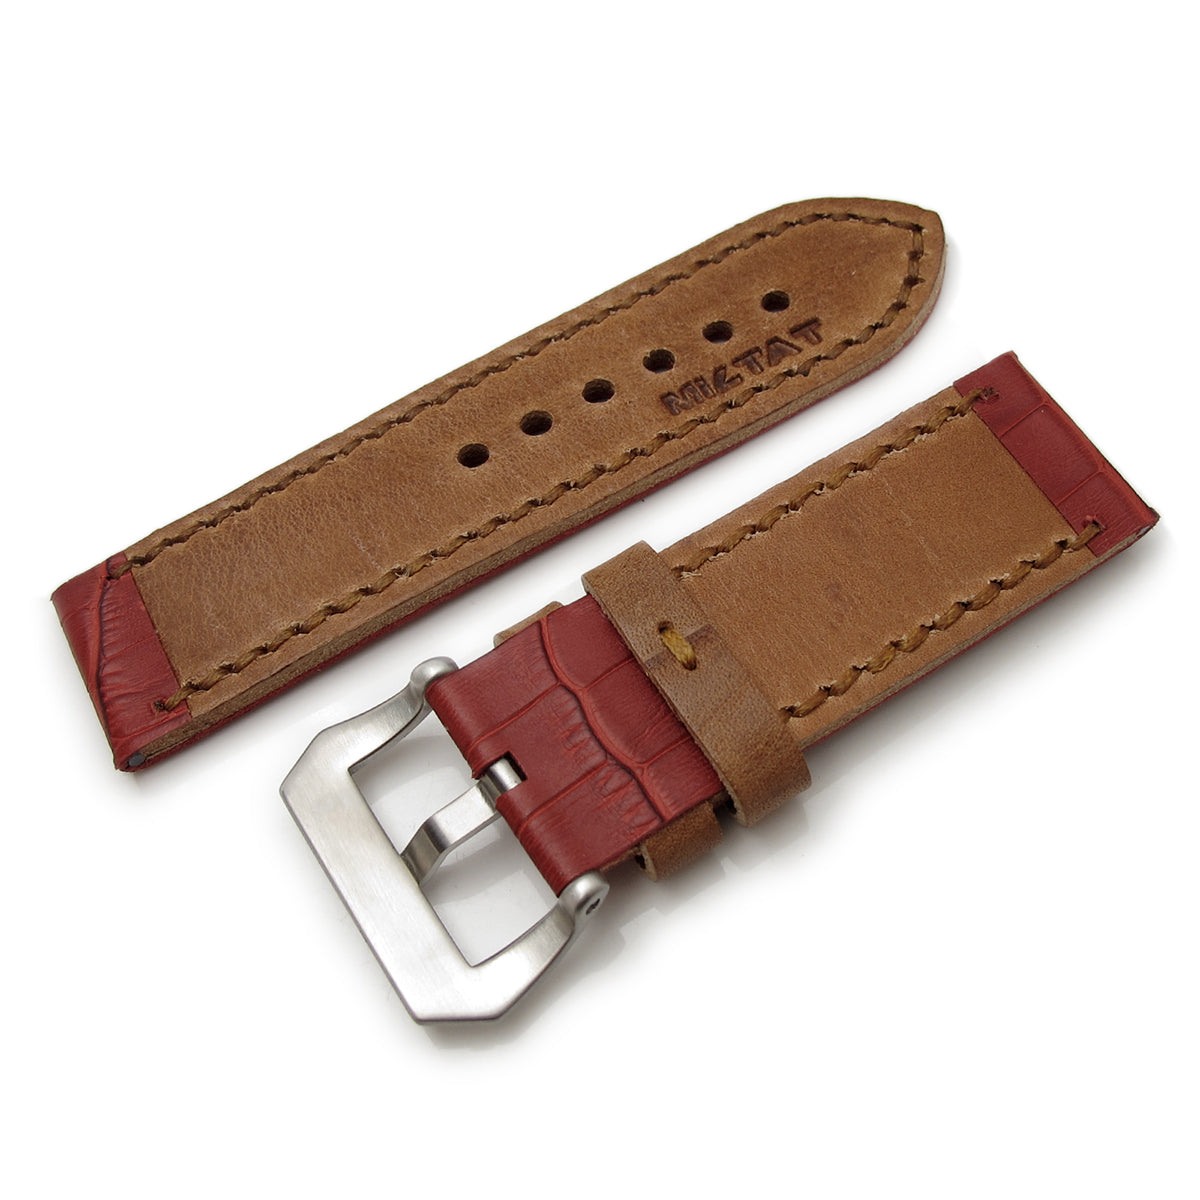 26mm MiLTAT Antipode Watch Strap Matte Red CrocoCalf in Tan Hand Stitches Strapcode Watch Bands